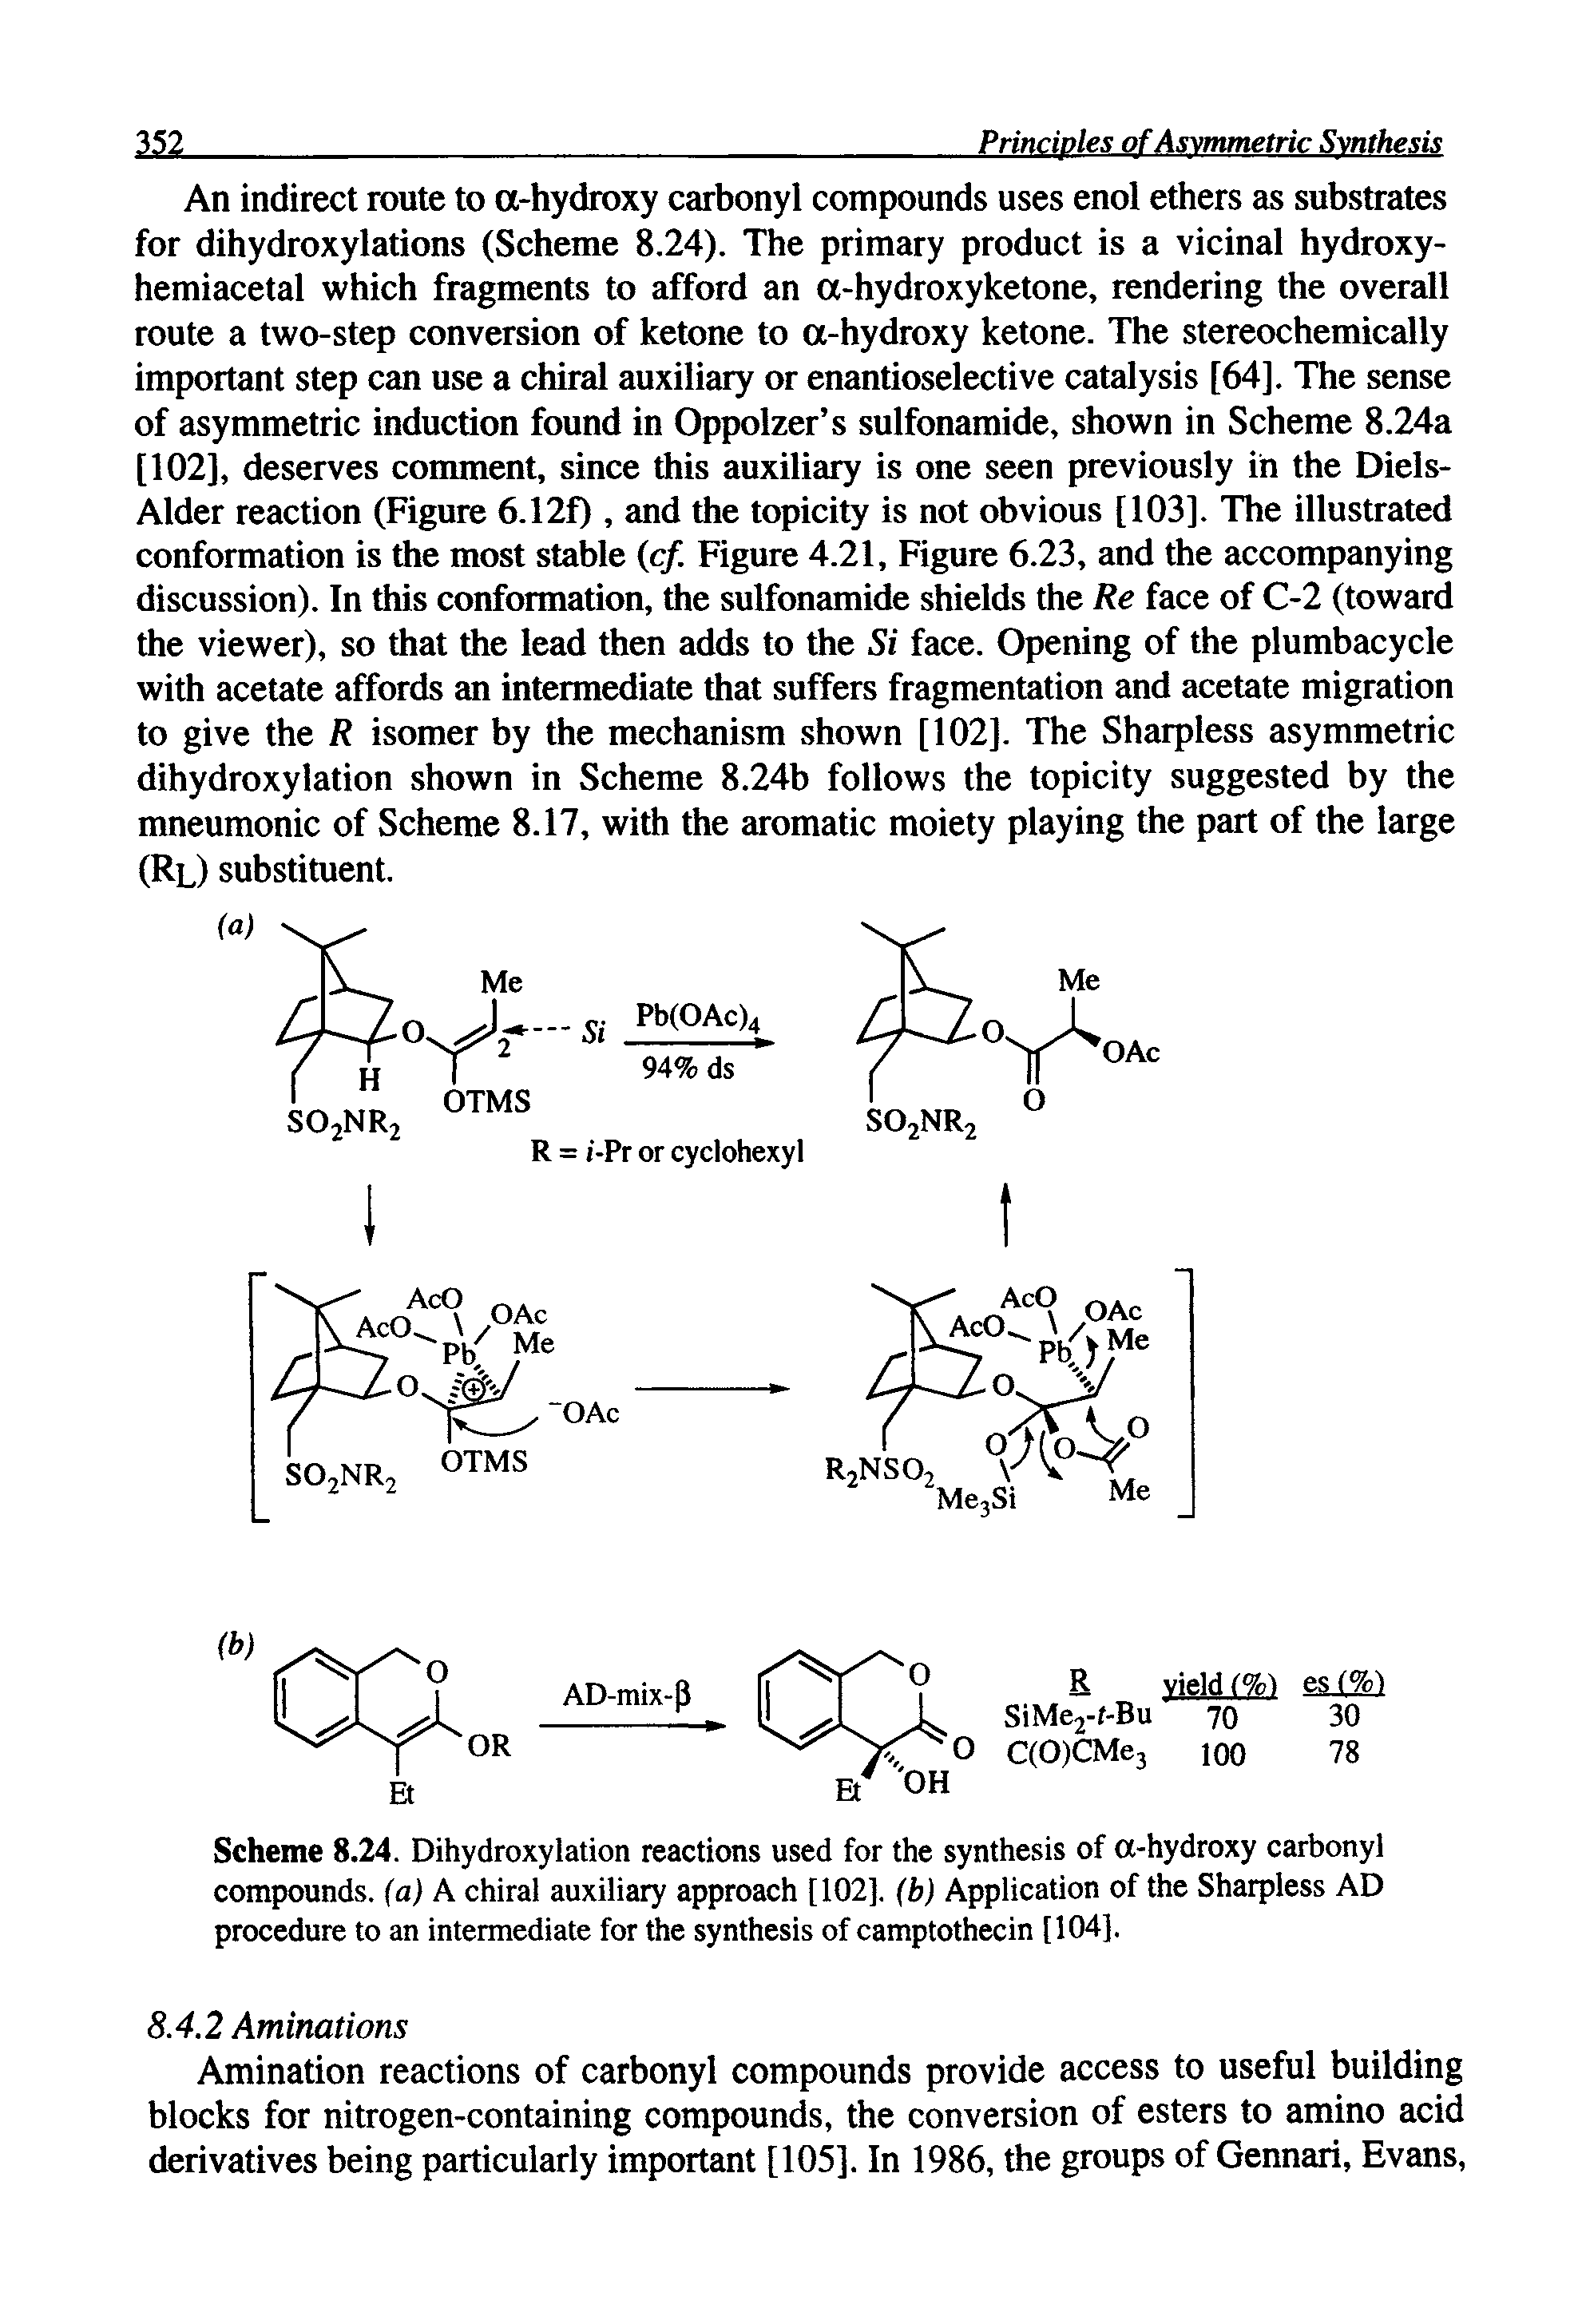 Scheme 8.24. Dihydroxylation reactions used for the synthesis of a-hydroxy carbonyl compounds, (a) A chiral auxiliary approach [102], (b) Application of the Sharpless AD procedure to an intermediate for the synthesis of camptothecin [104].